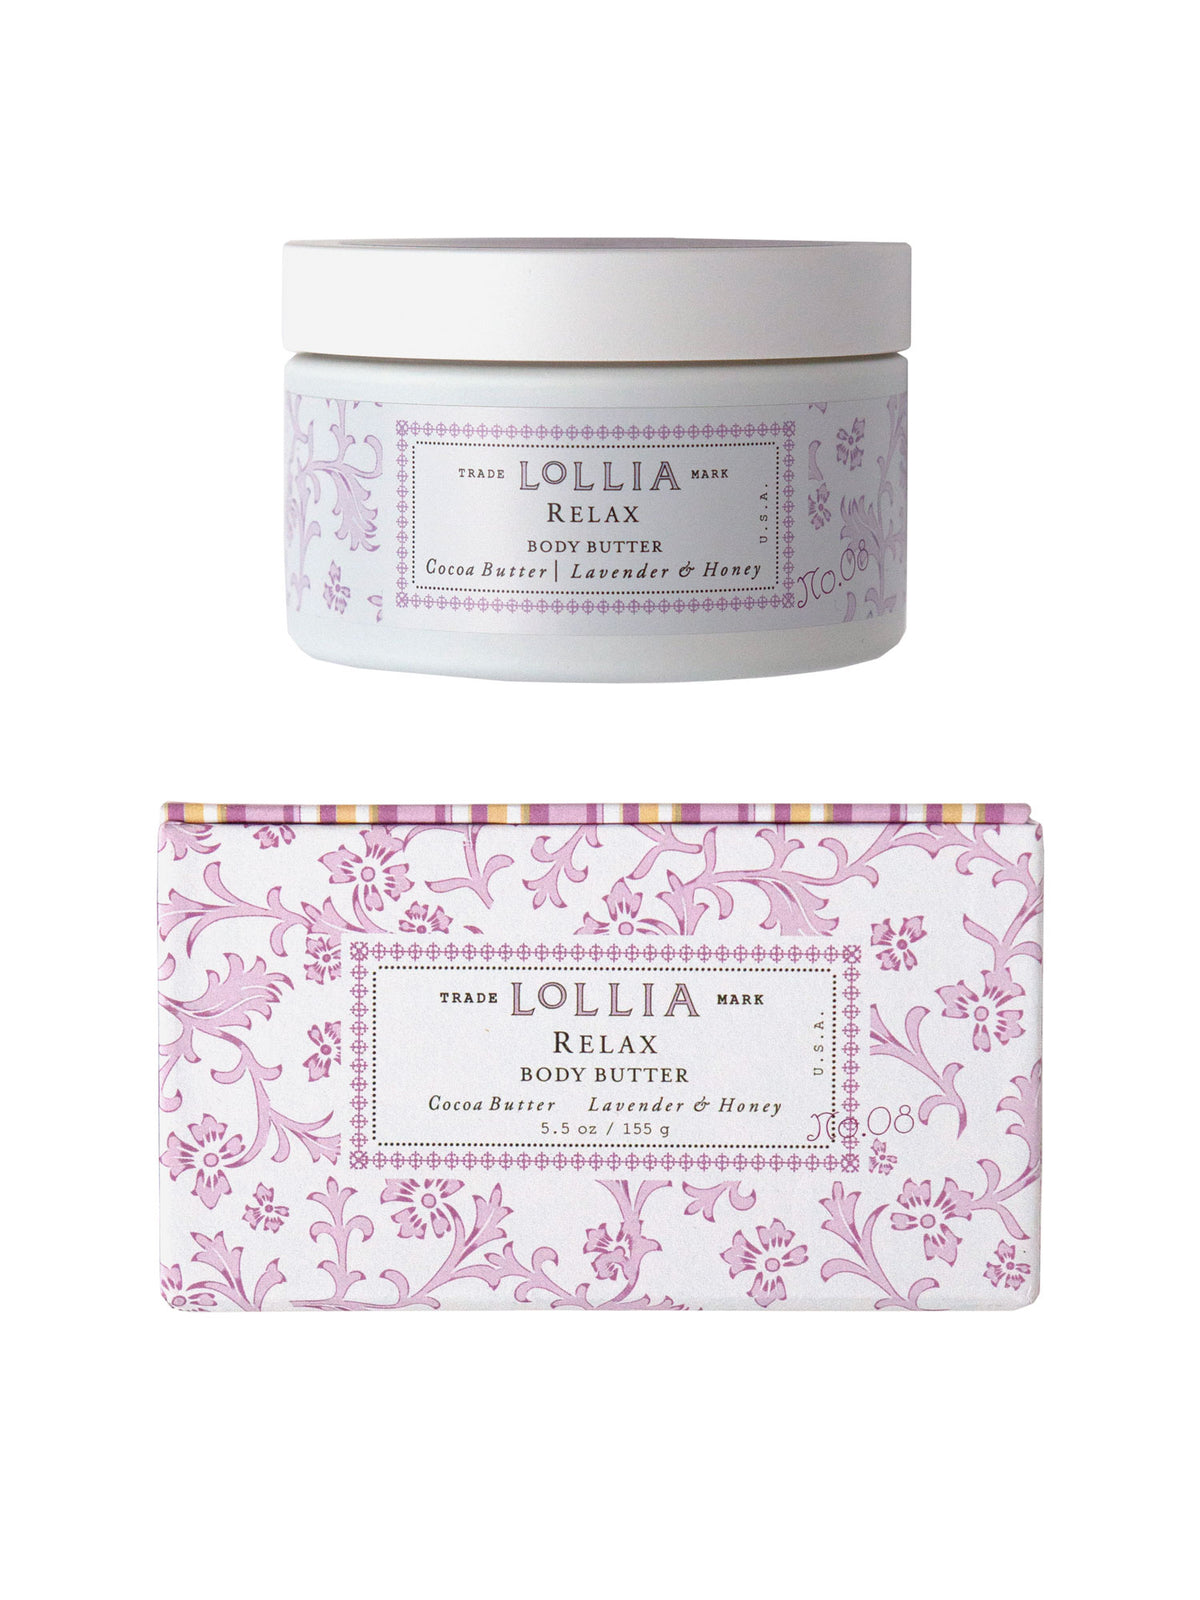 A Margot Elena Lollia Relax Body Butter container and its matching box, both adorned with a lilac and white floral design and elegant script detailing product ingredients like shea butter, lavender & honey.